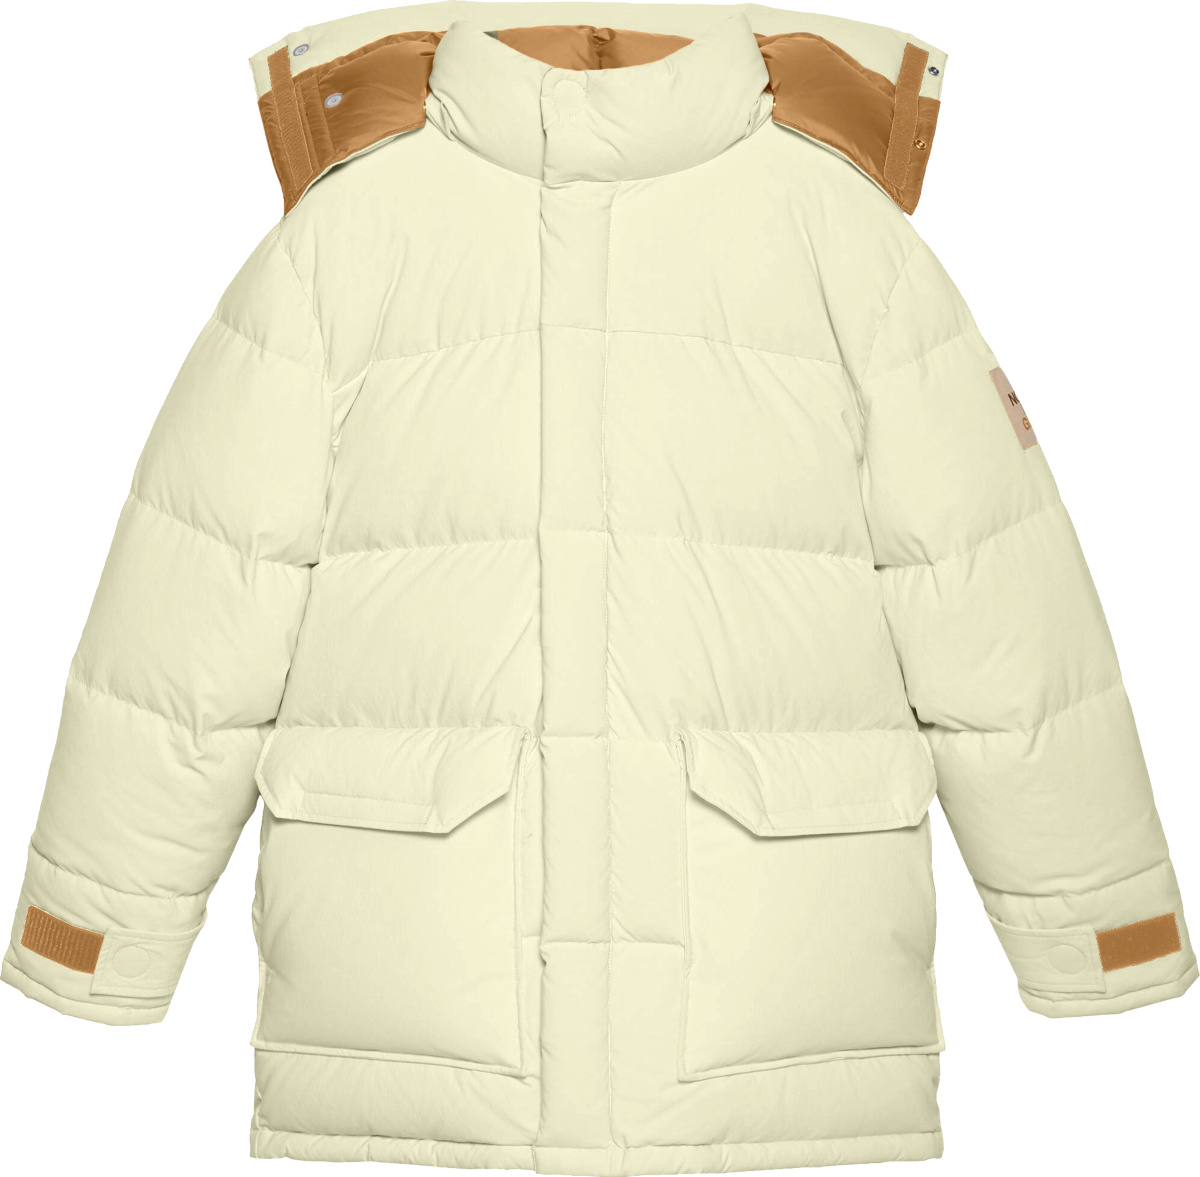 Gucci x The North Face Ivory Puffer Jacket | Incorporated Style